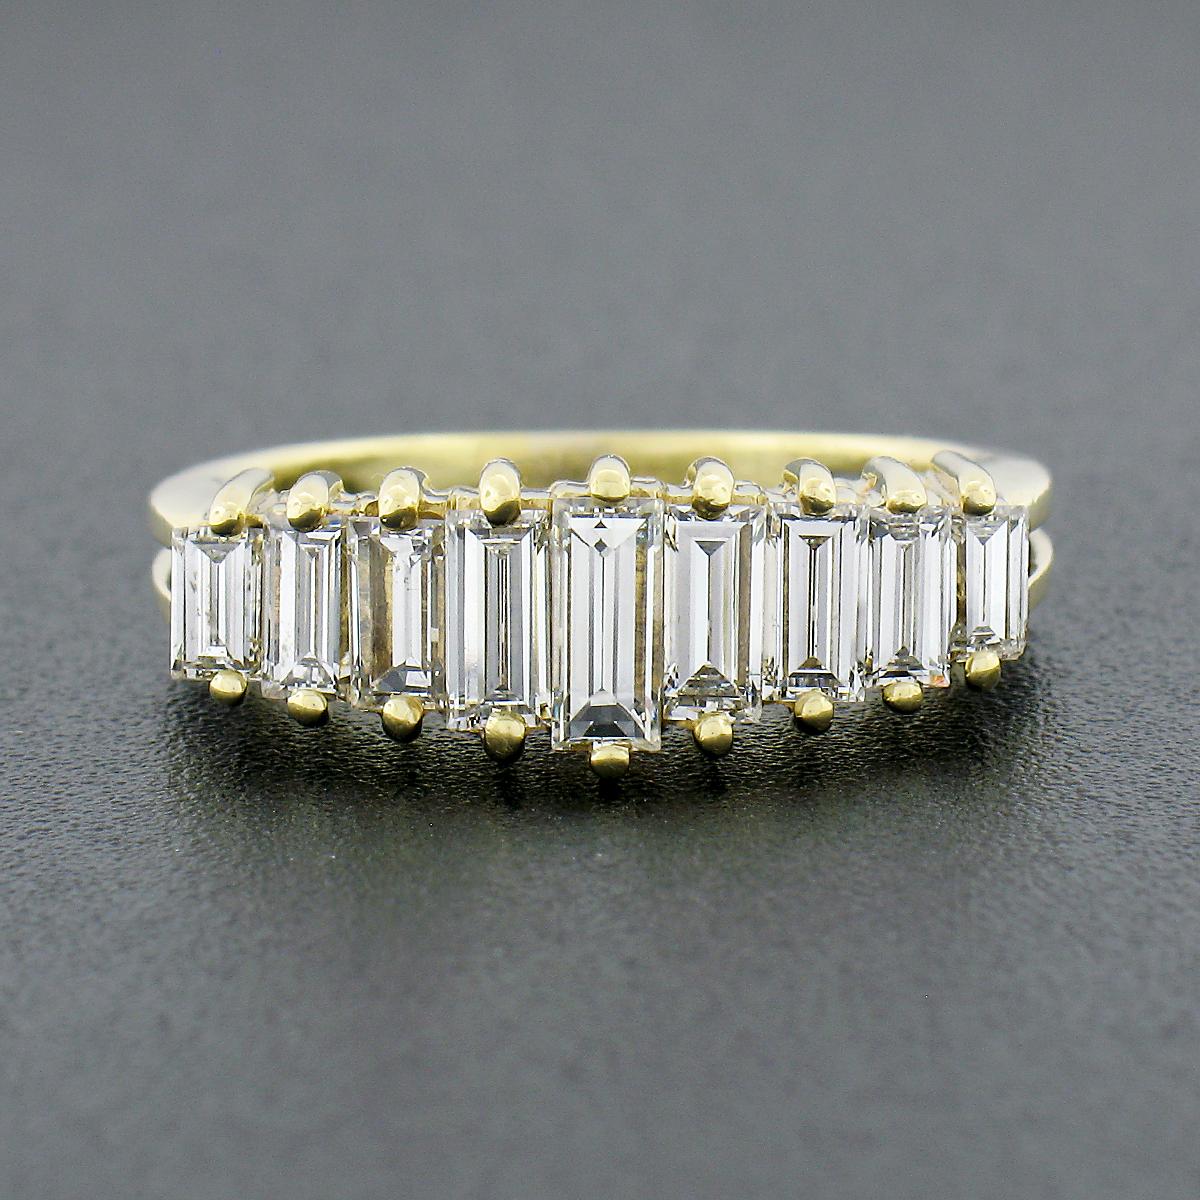 This gorgeous vintage band ring was crafted from solid 18k yellow gold and features 9 straight baguette cut diamonds that are neatly set in a pyramid style across the top. The fine diamonds perfectly graduate in size and height with the largest and